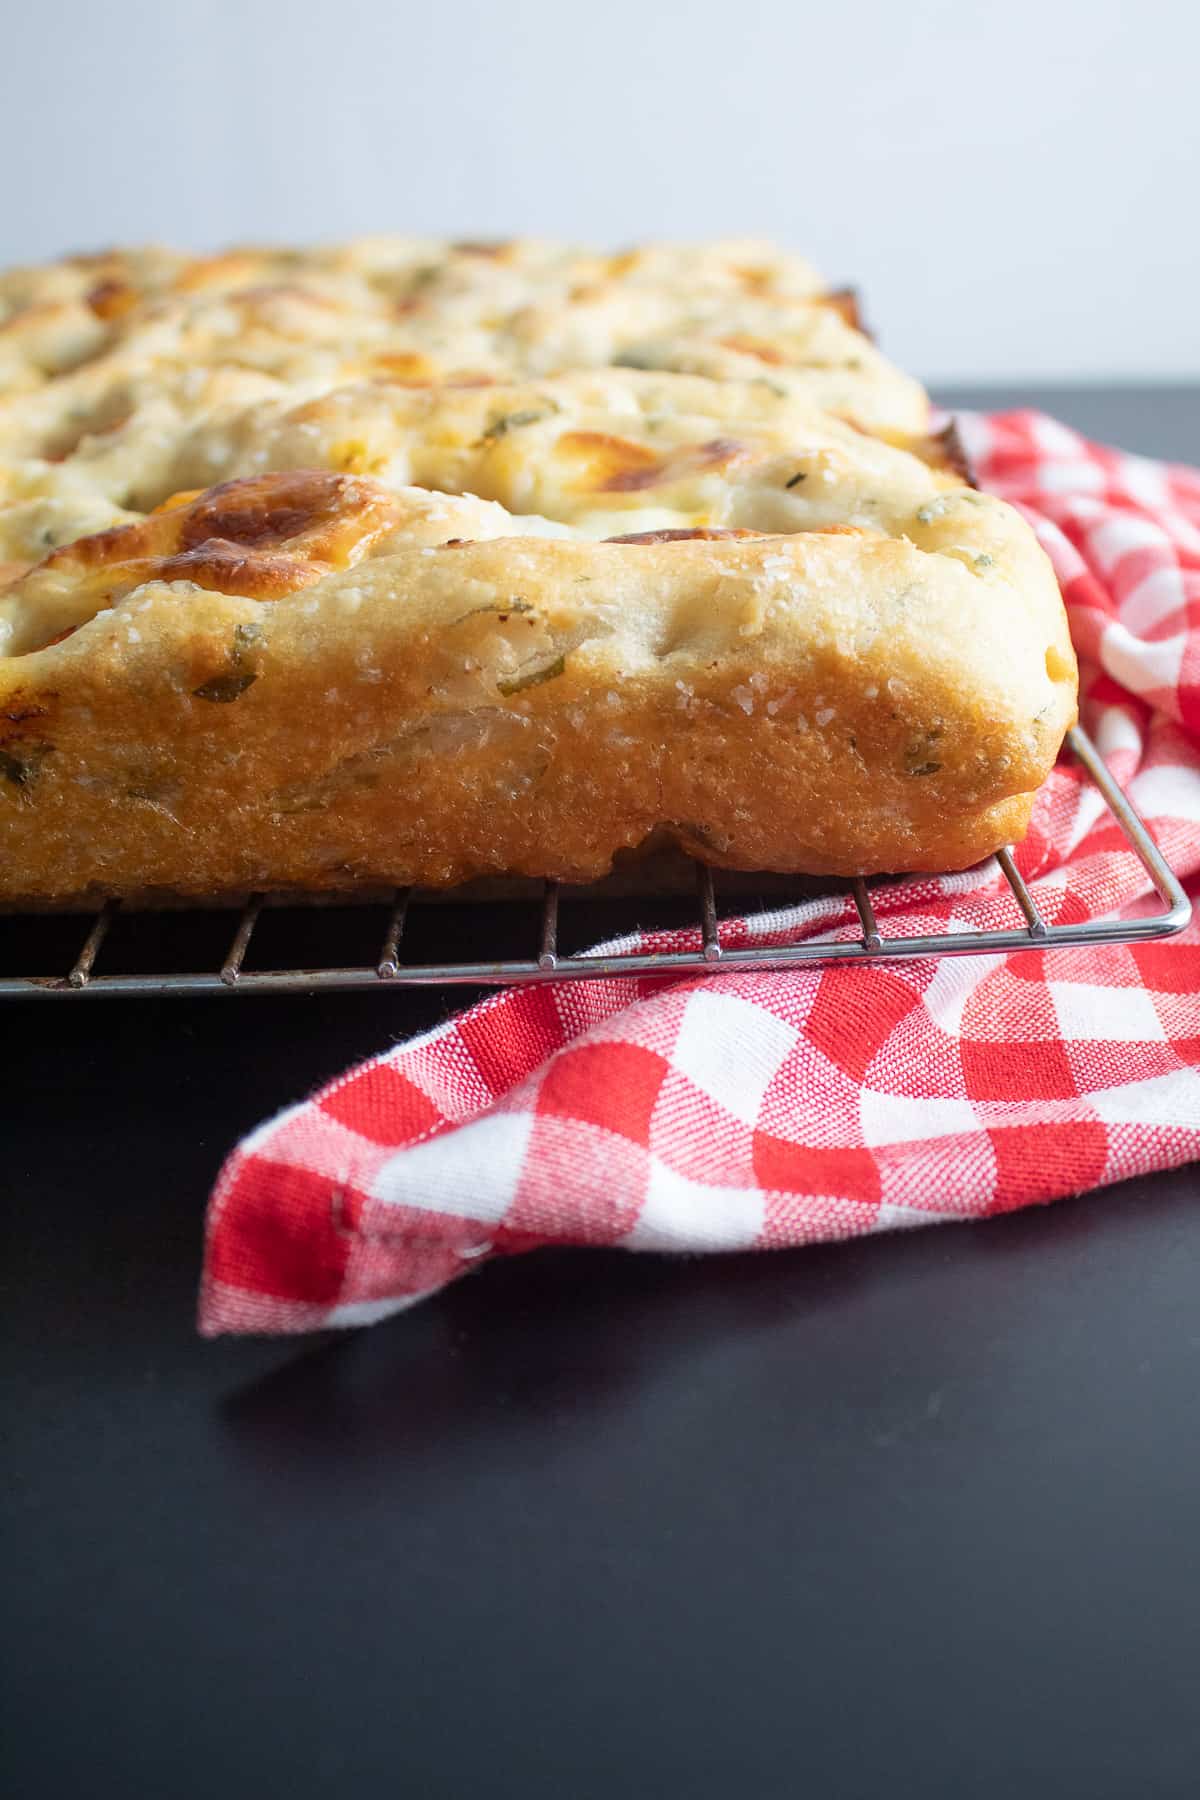 The crispy edges of the baked focaccia.